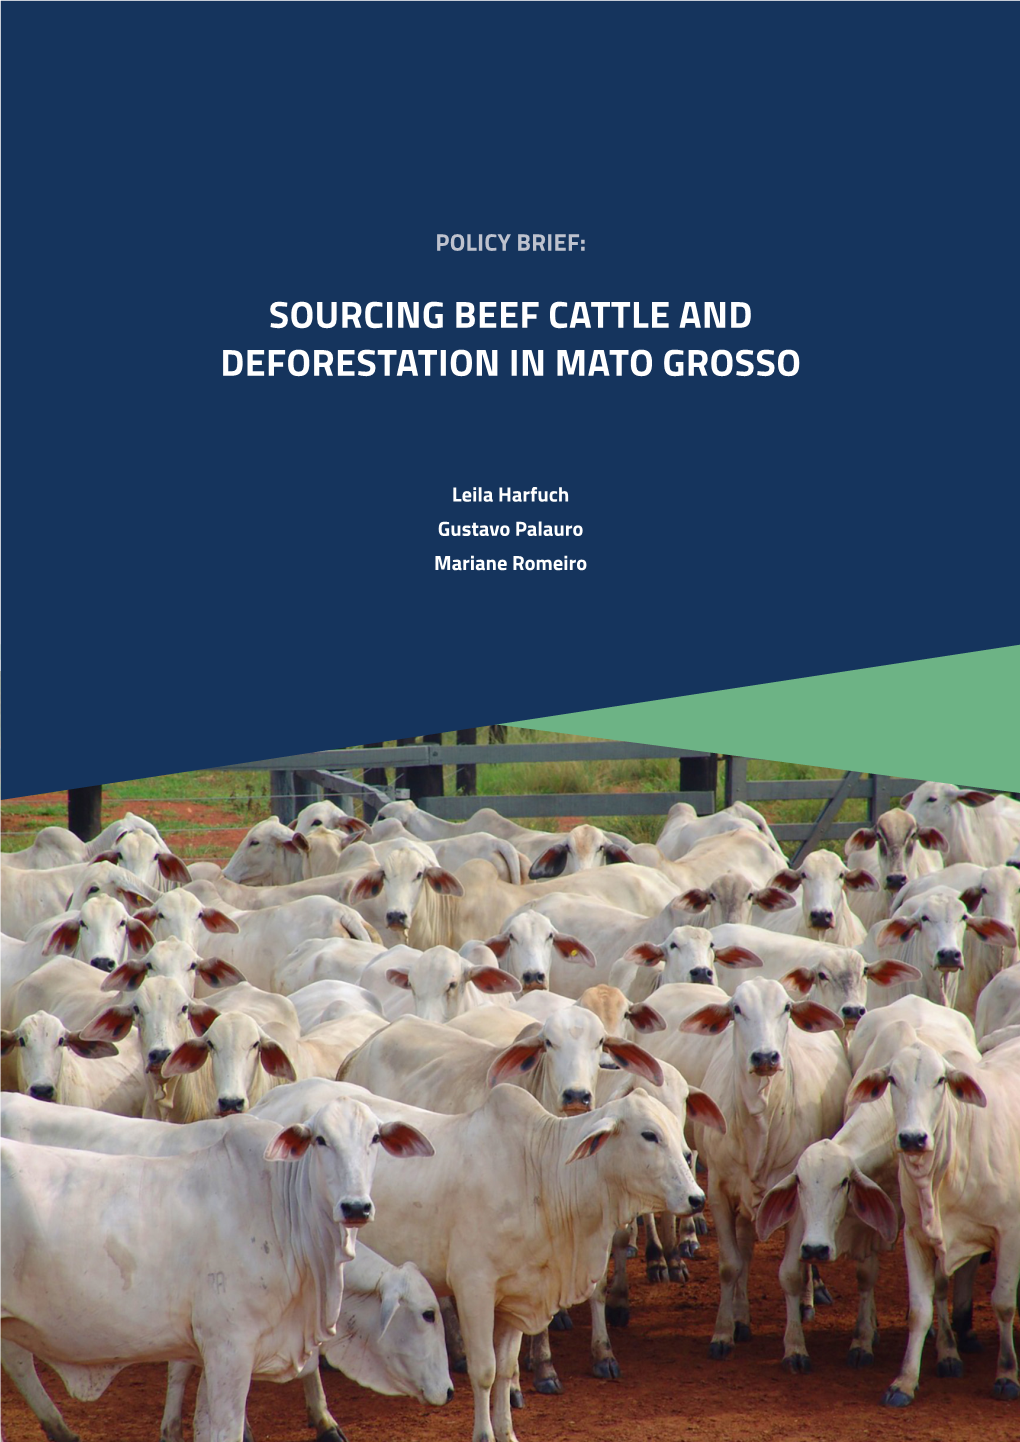 Policy Brief Sourcing Beef Cattle and Deforestation in Mato Grosso